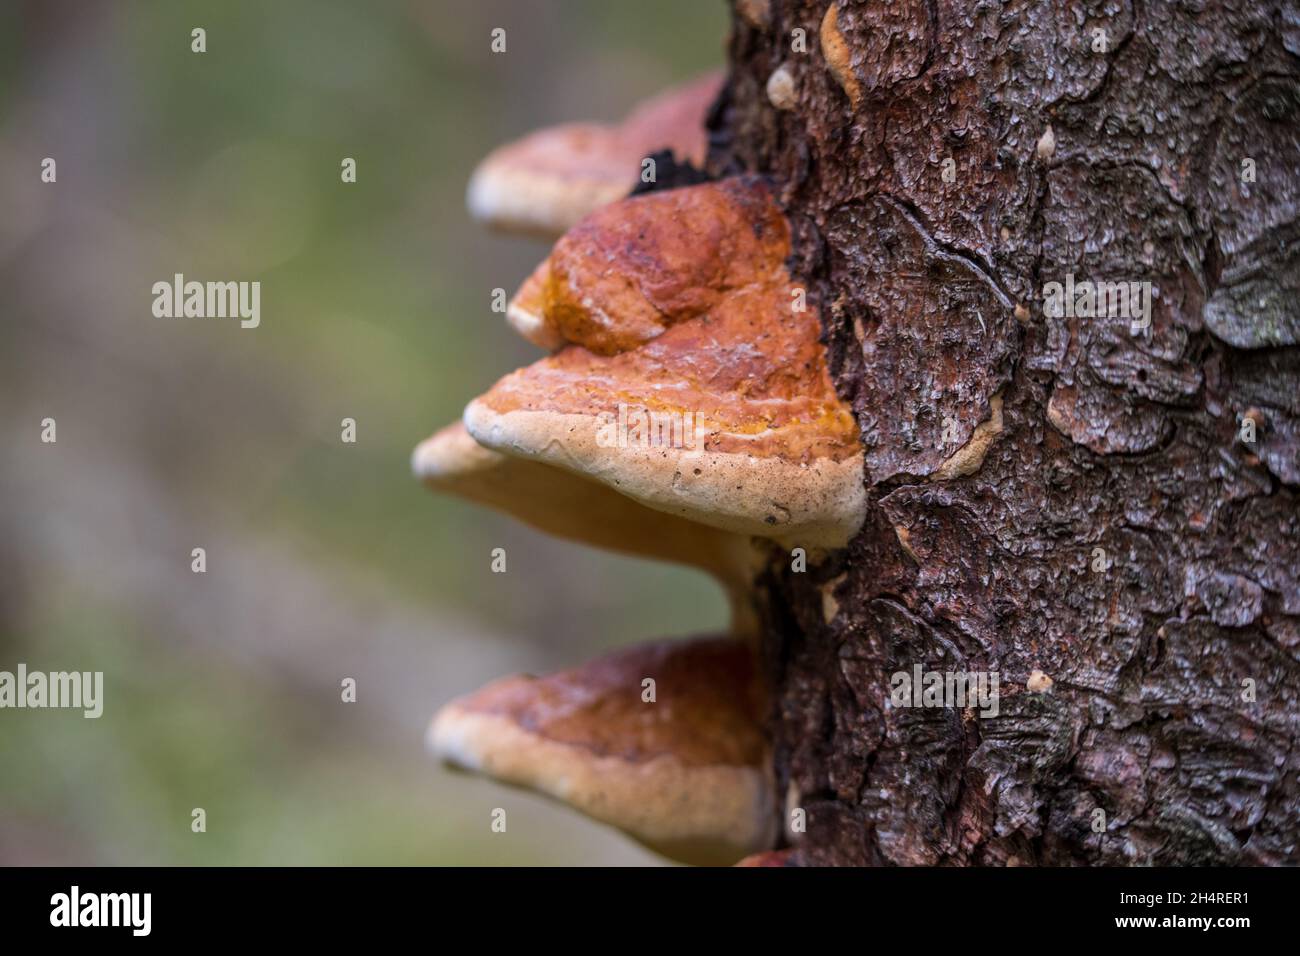 close-up of tree fungus growing on the bark of an old tree Stock Photo